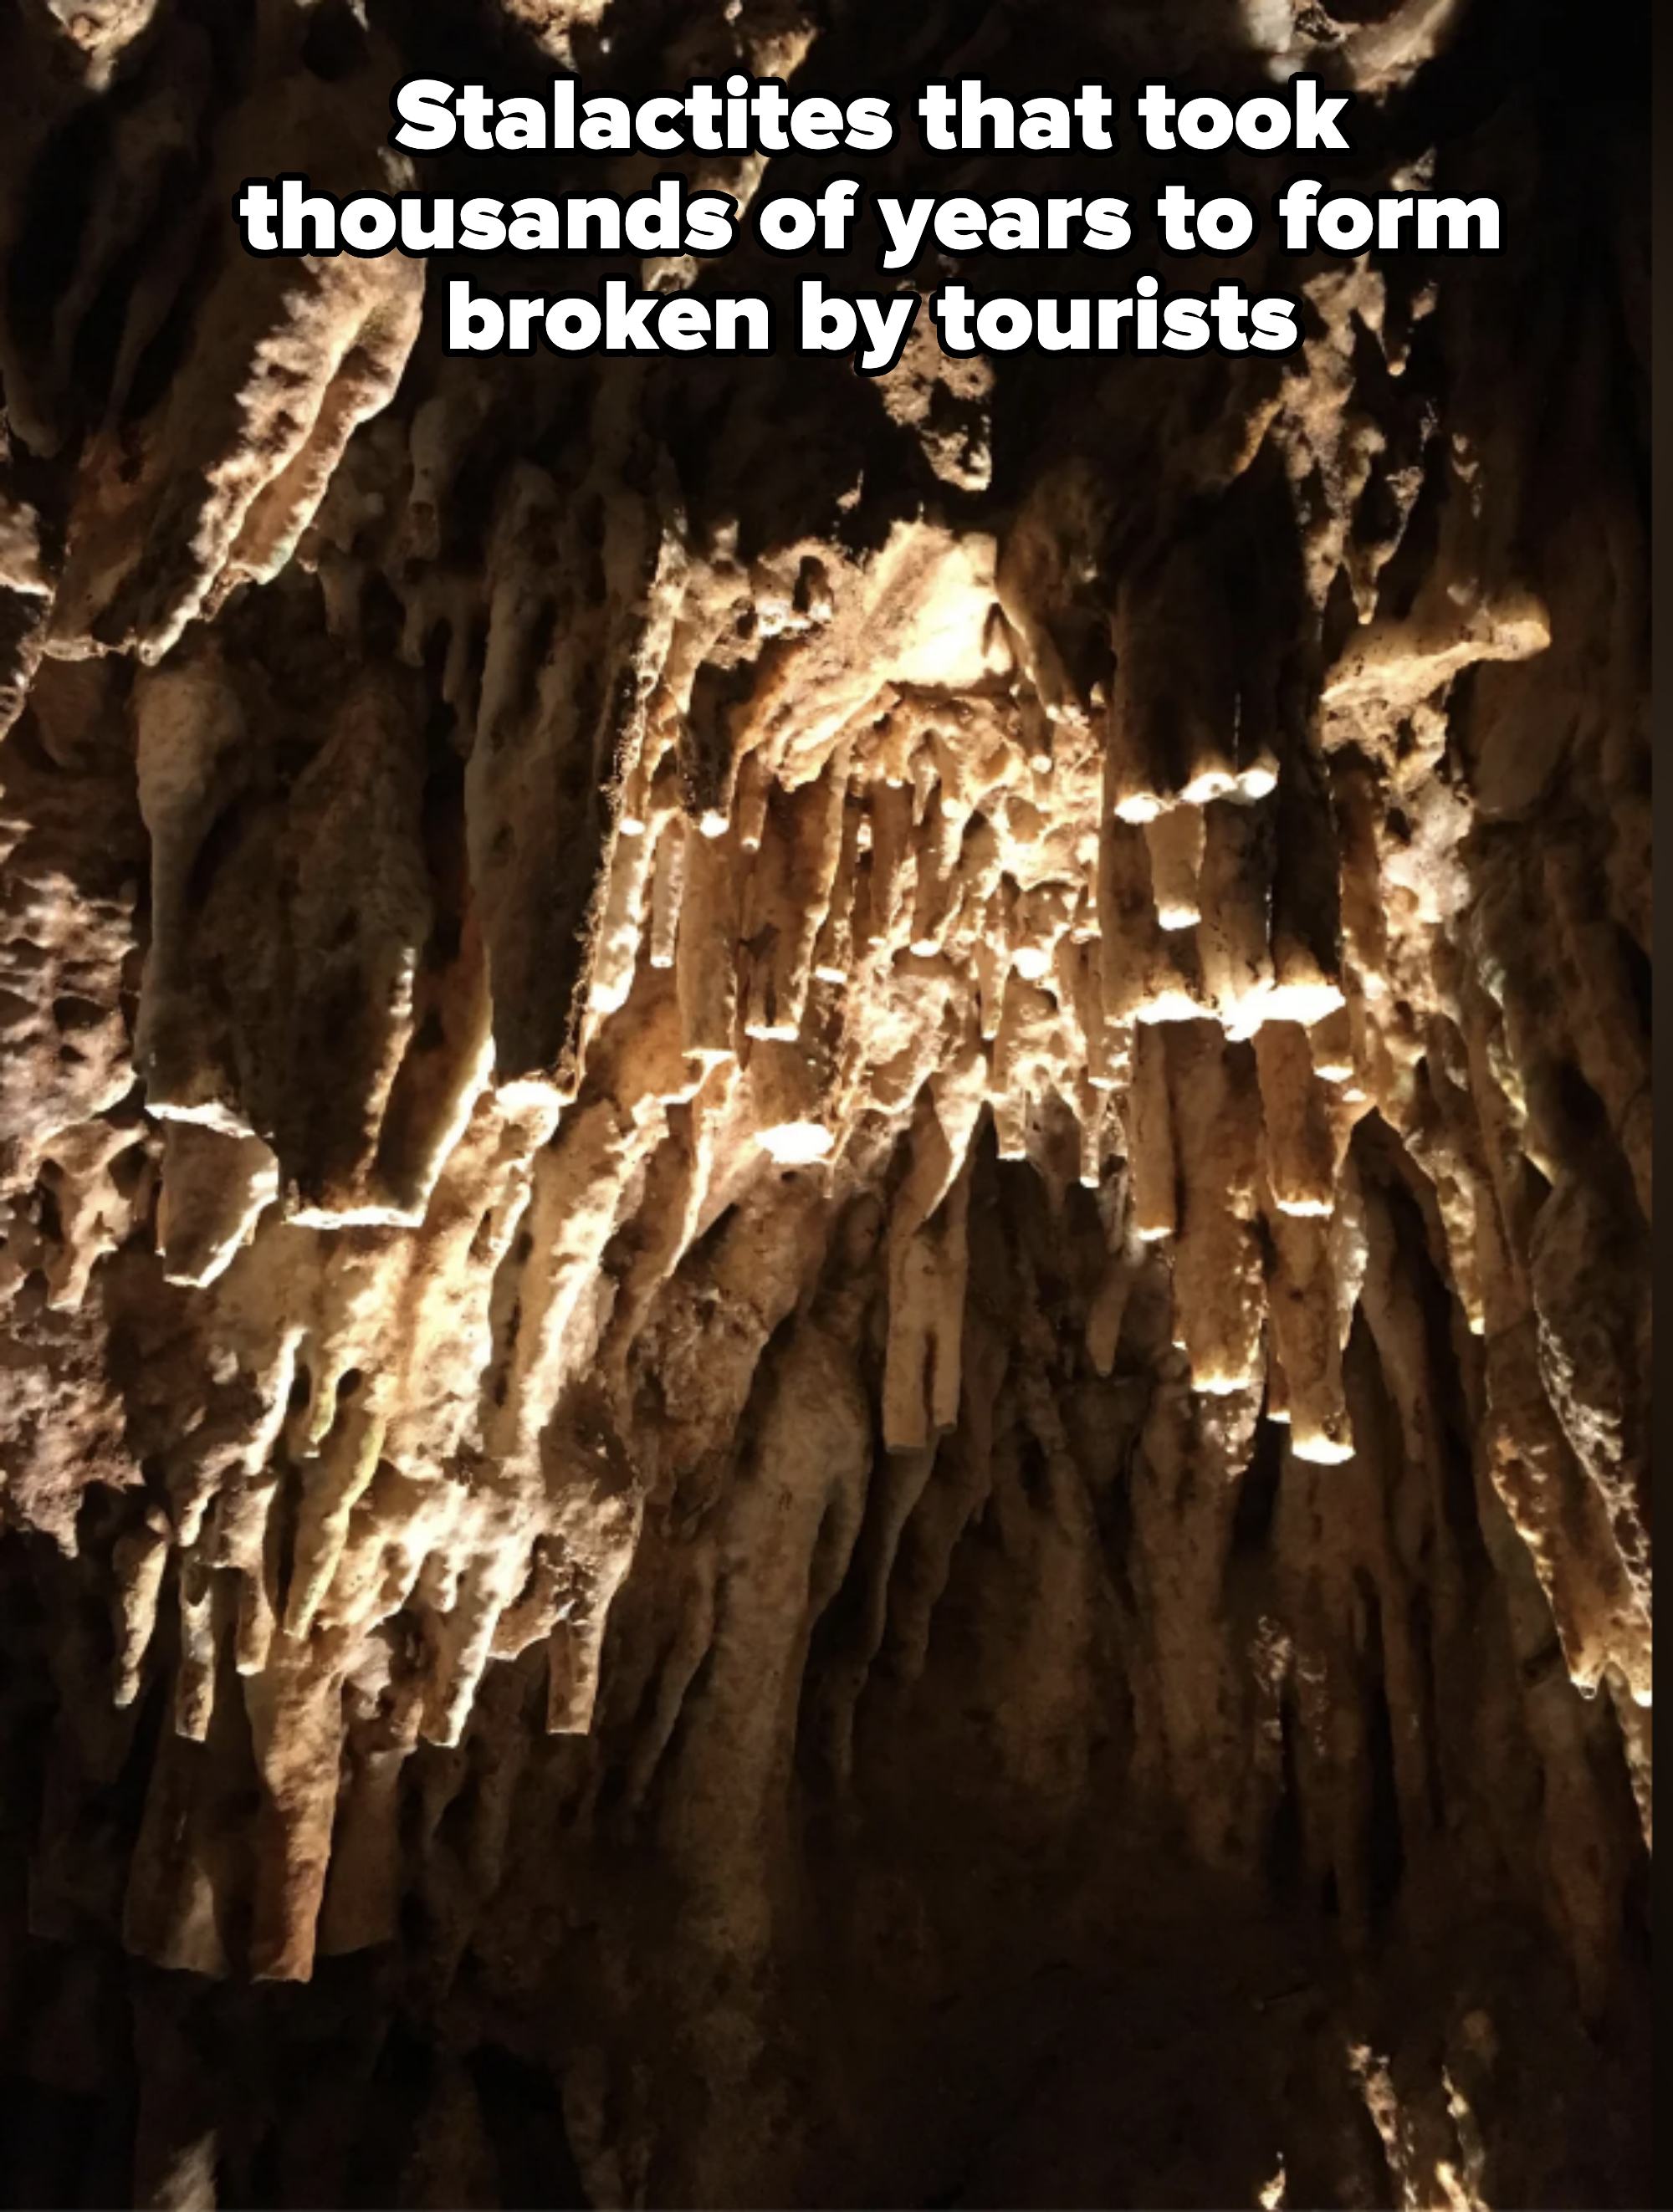 A cave&#x27;s interior with illuminated stalactites and stalagmites hanging from the ceiling